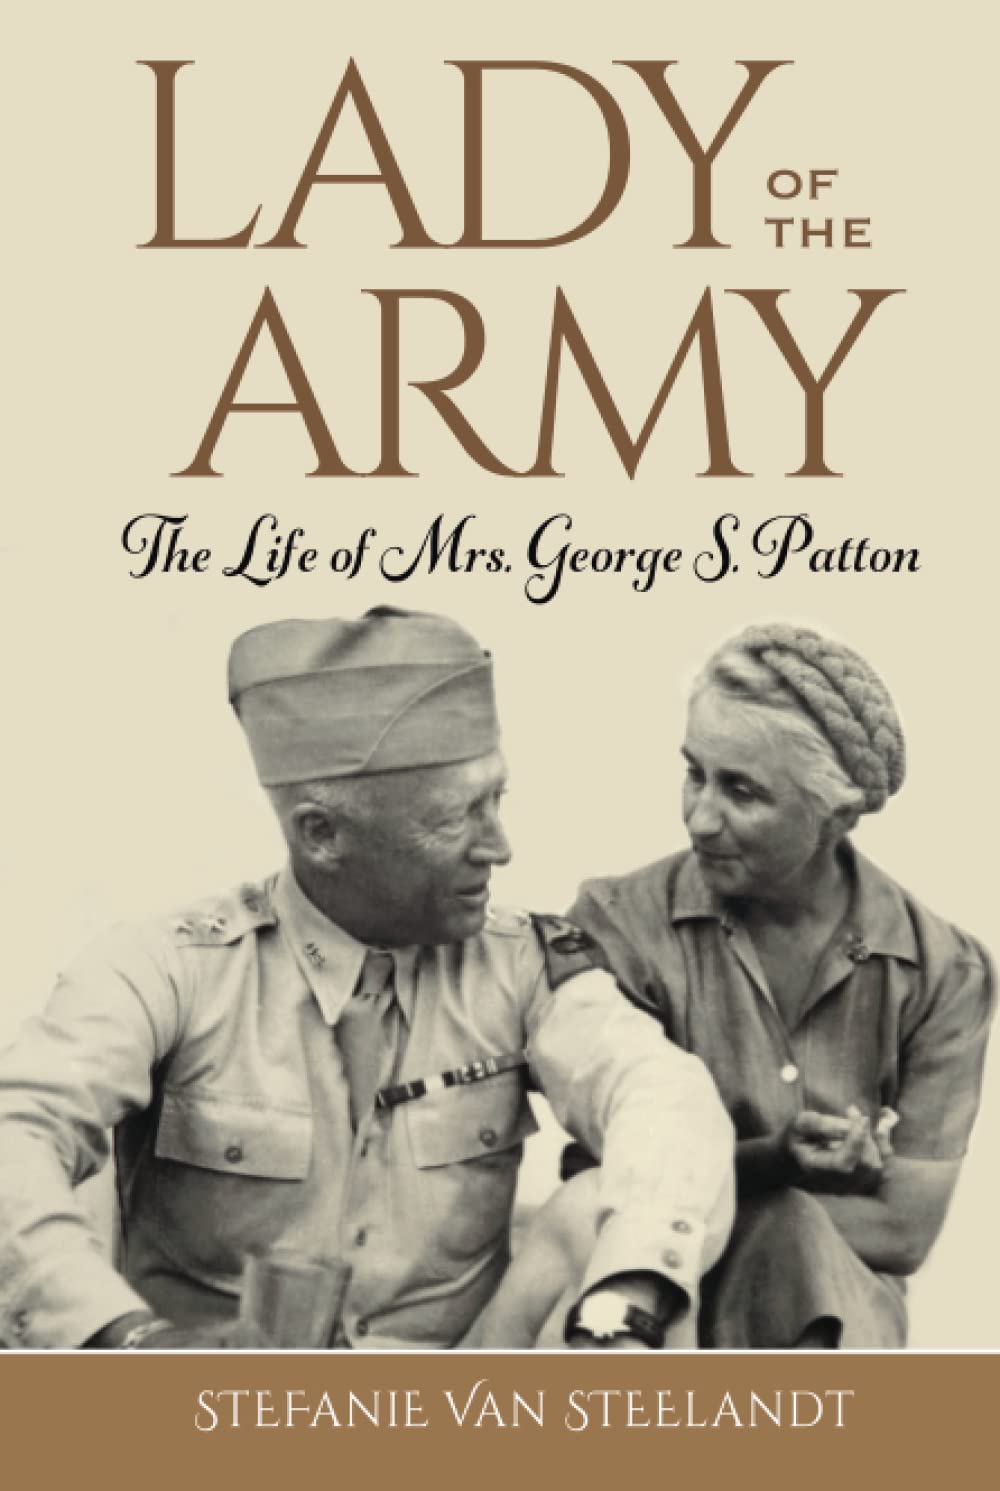 Lady of The Army: The Life of Mrs. George S. Patton with Author Stefanie Van Steelandt